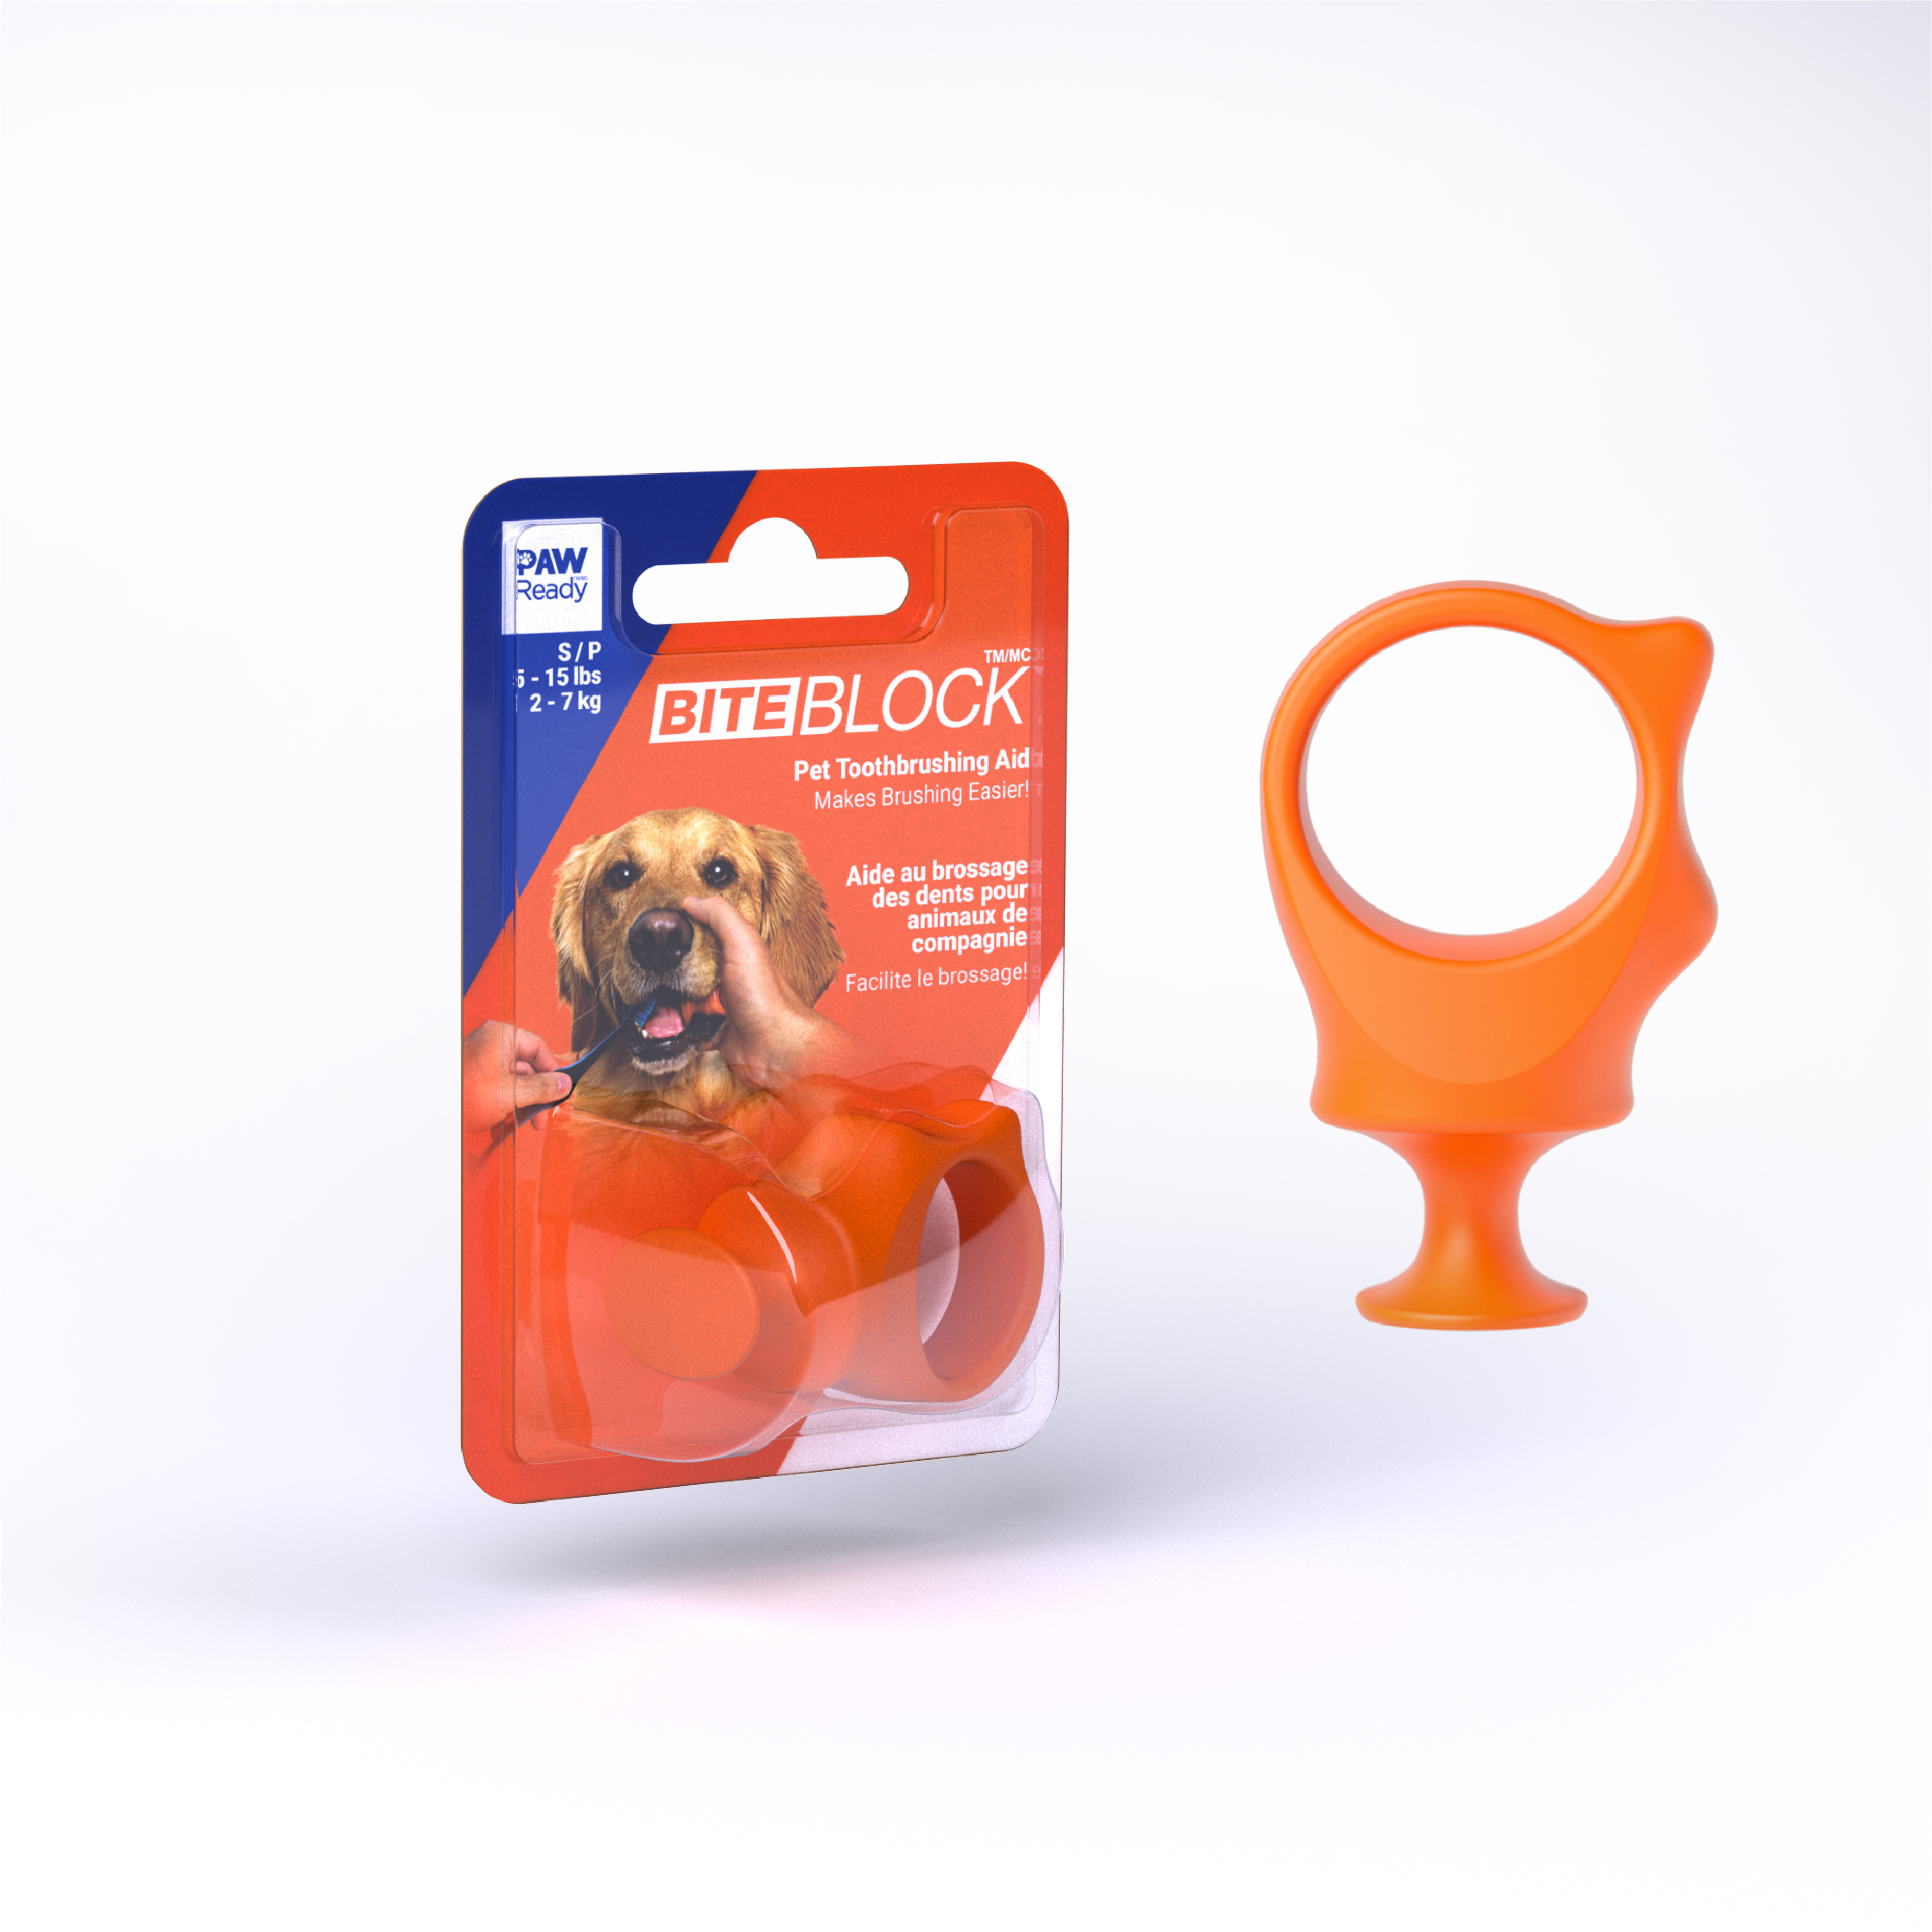 Bite Block Pet Toothbrushing Aid for Puppies, Dogs and Cats